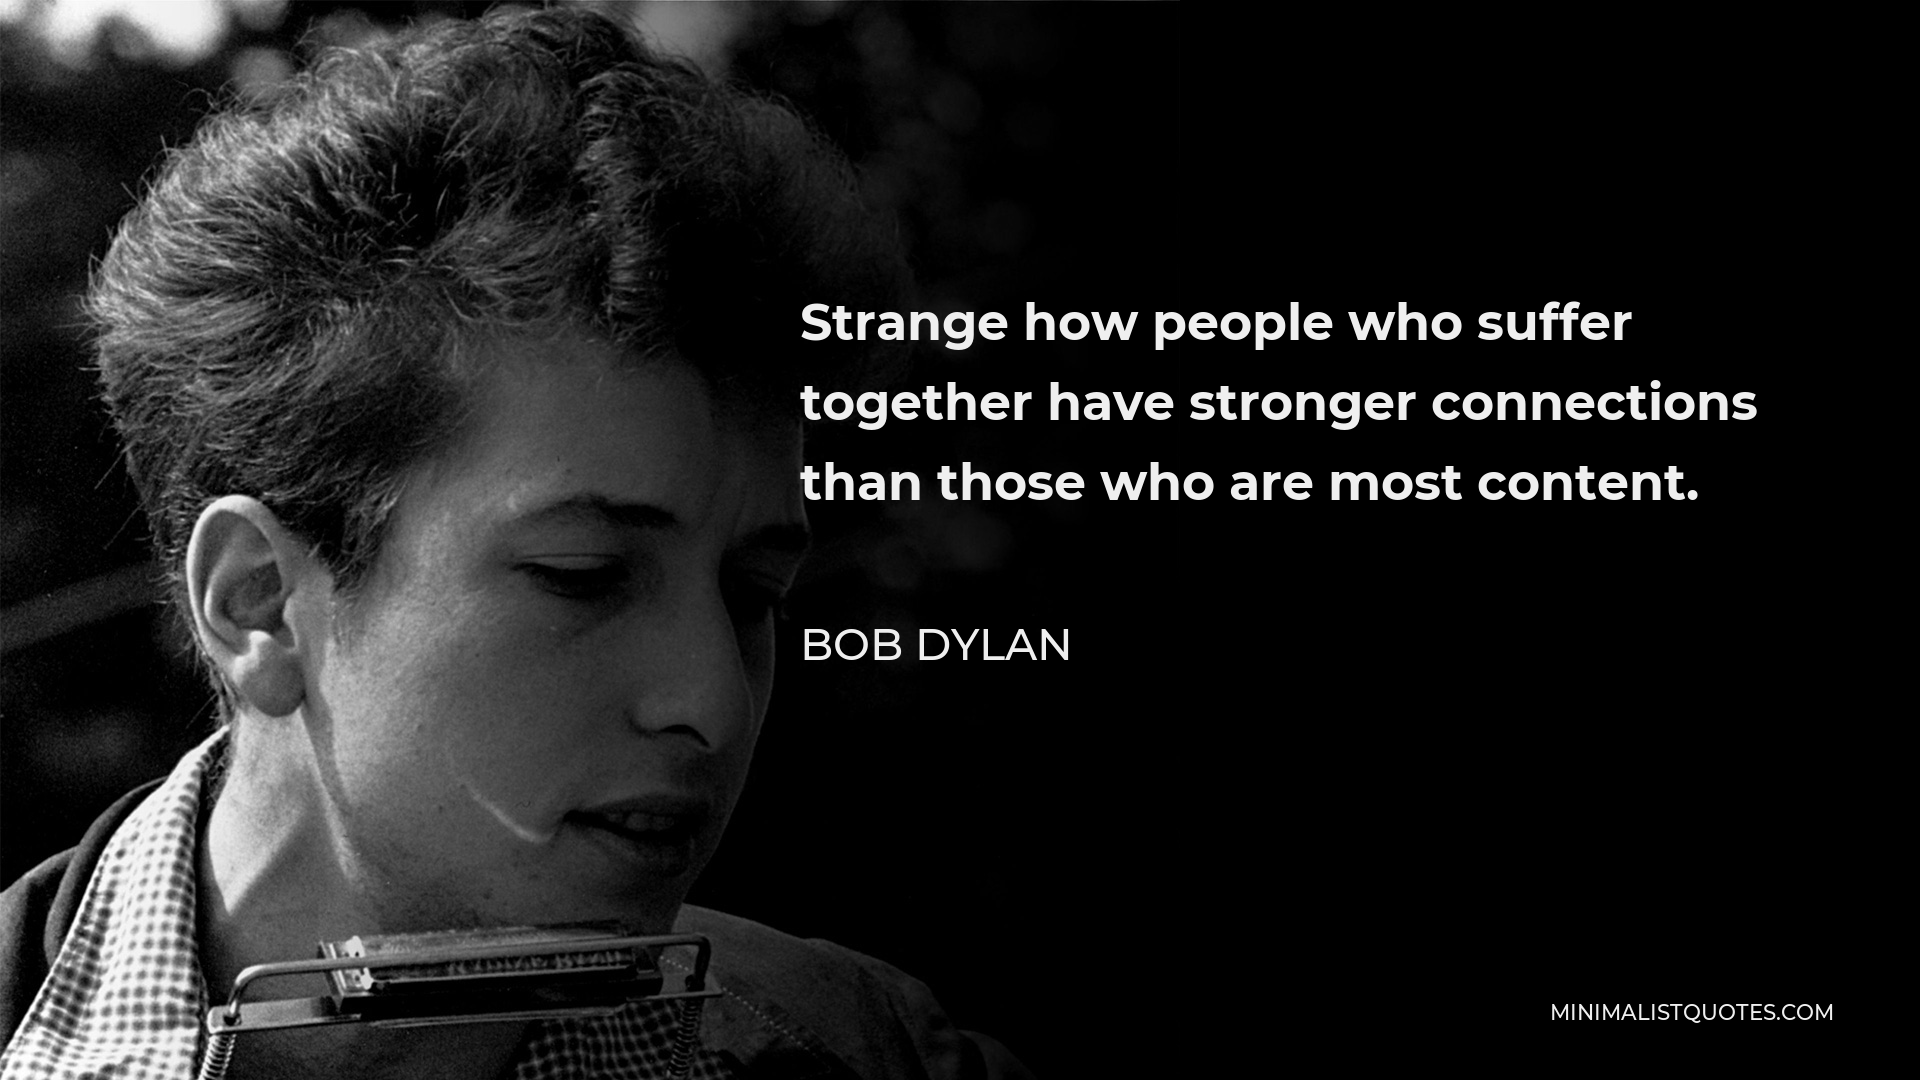 Bob Dylan Quote - Strange how people who suffer together have stronger connections than those who are most content.